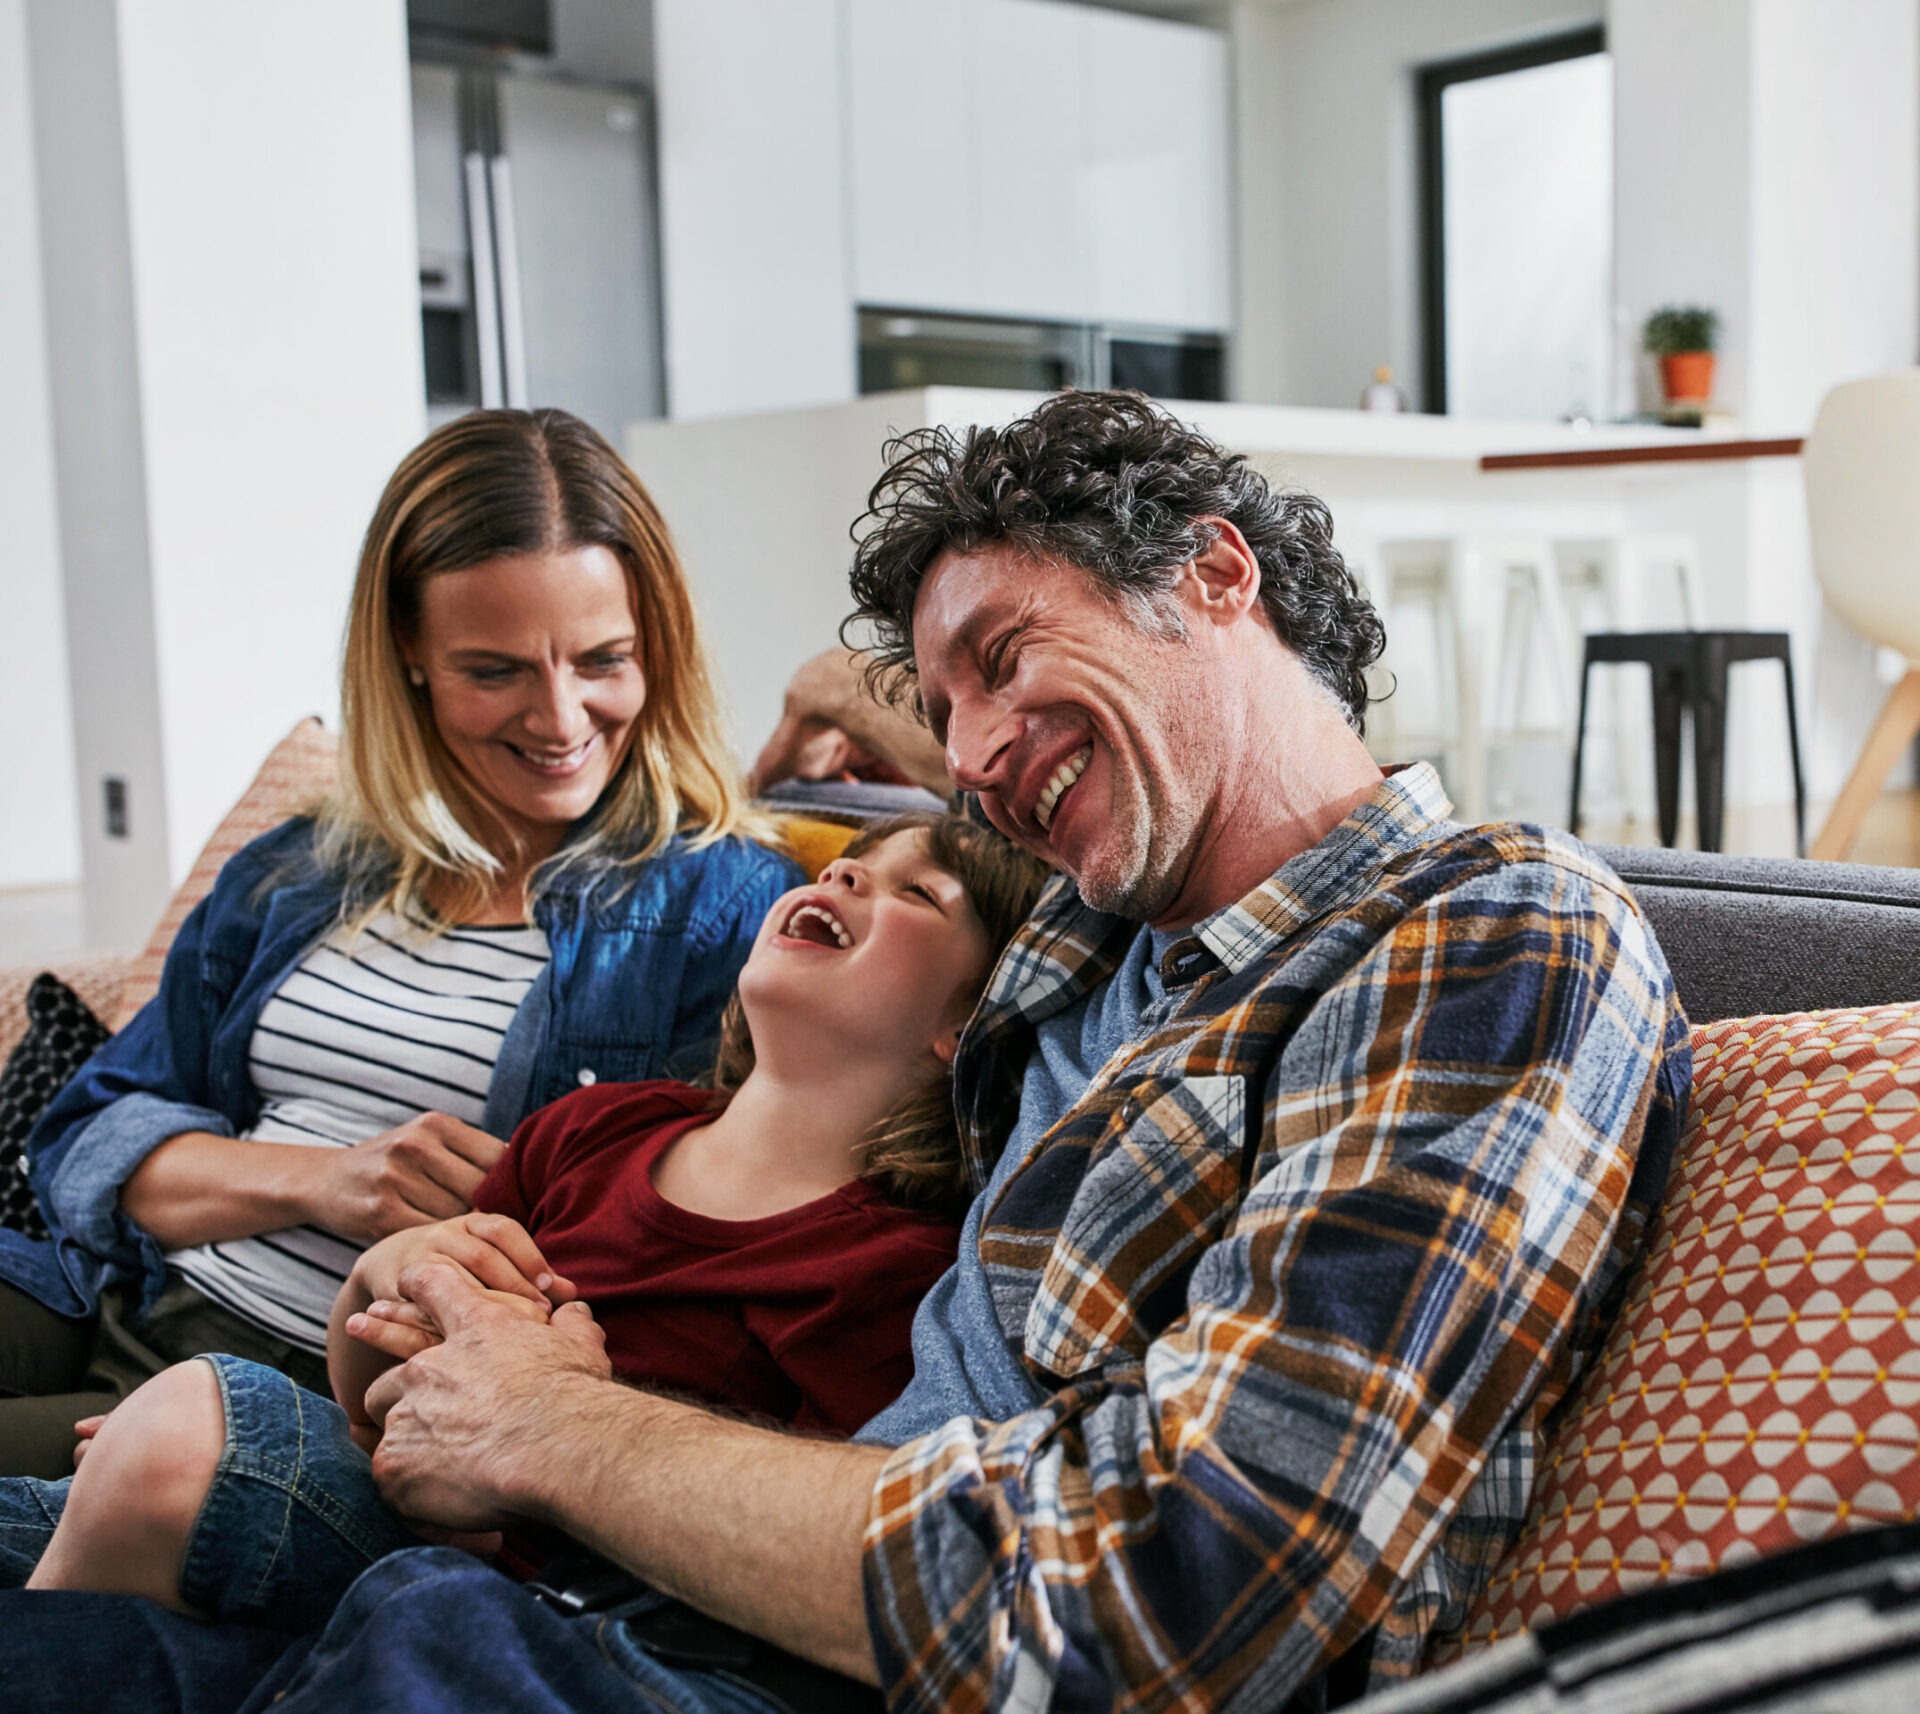 Two adults and a child are laughing and lounging on a couch in a cozy, well-lit living room, suggesting a warm, joyful family moment.